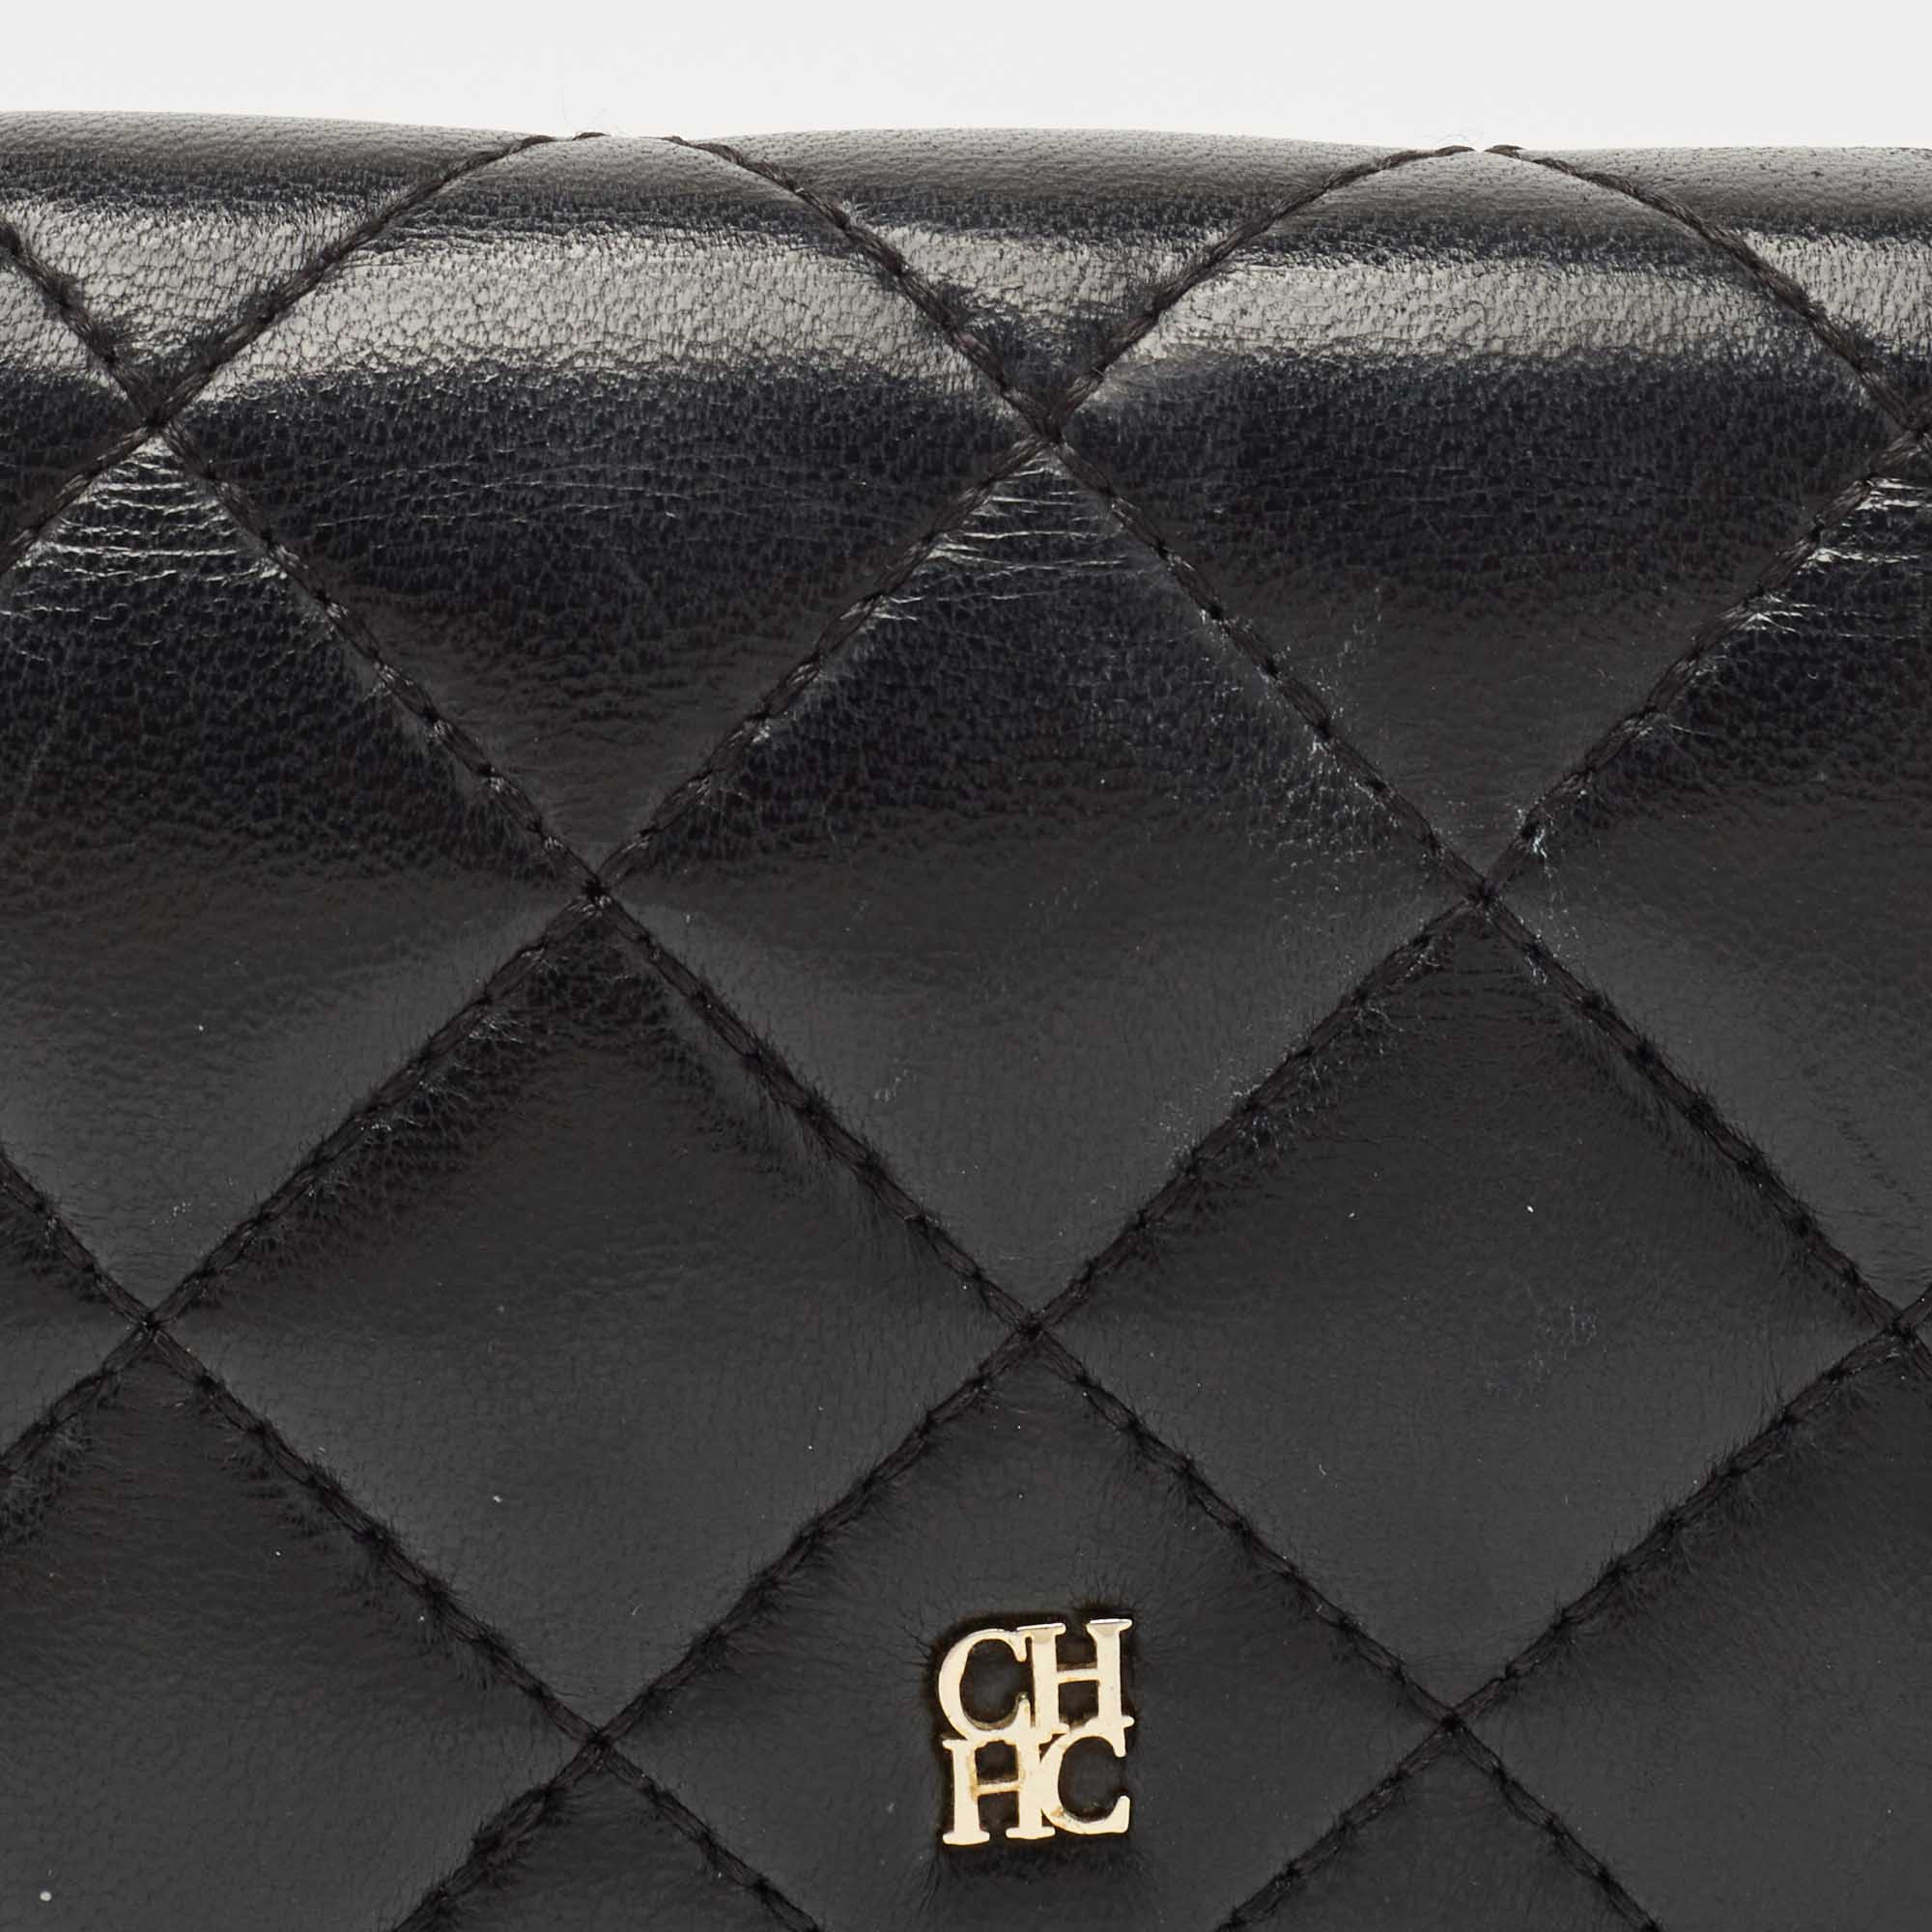 CH Carolina Herrera Black Quilted Leather Logo Trifold Wallet